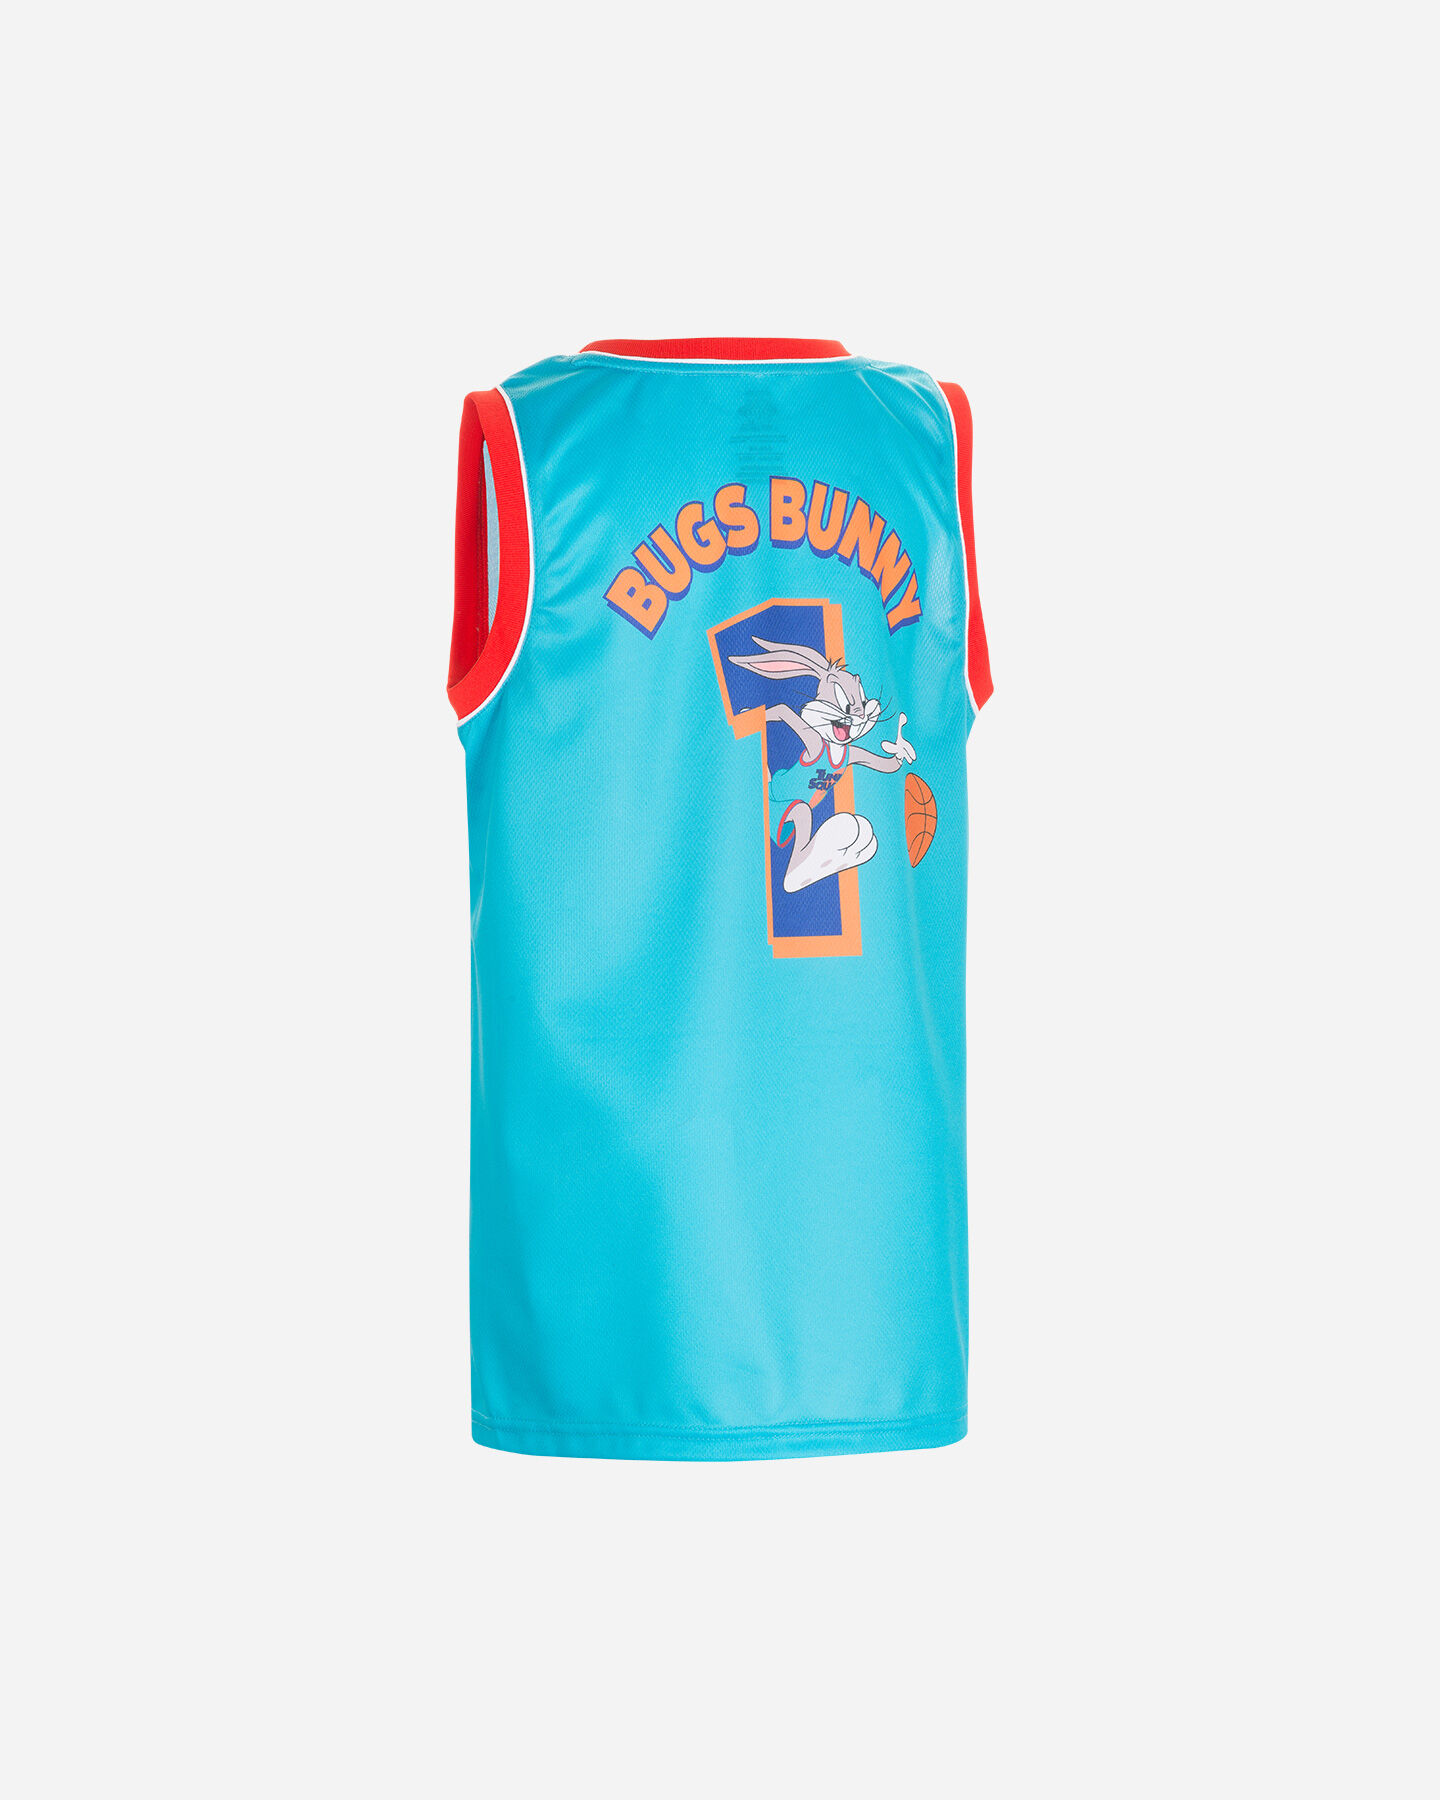  Canotta OUTERSTUFF SPACE JAM BUGSBUNNY JR S4095944|000|S scatto 1